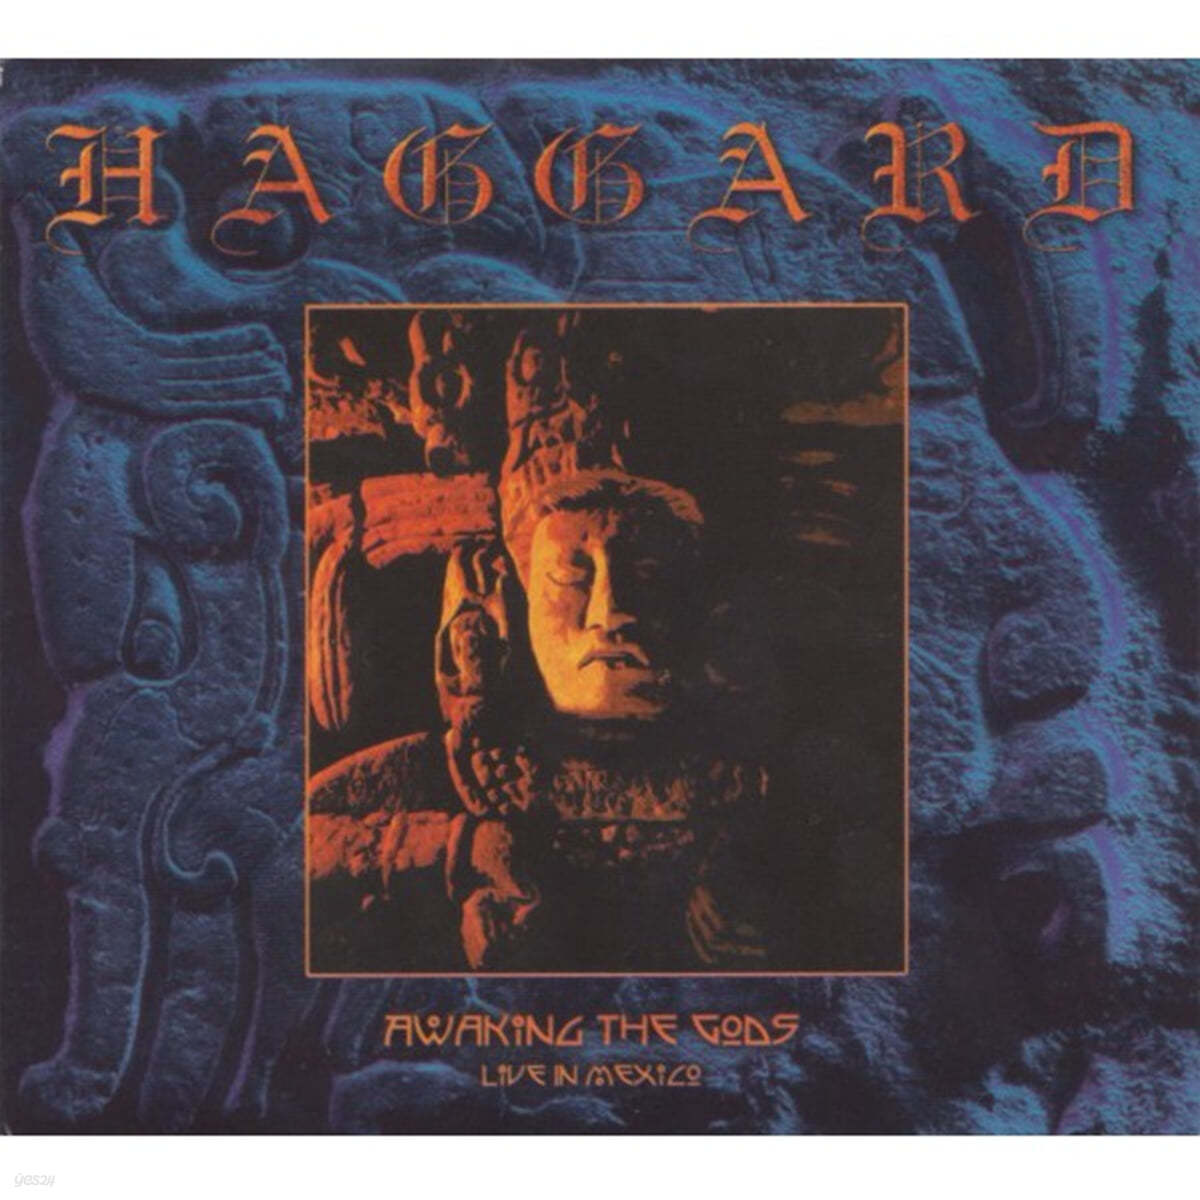 Haggard (해거드) - Awaking The Gods : Live In Mexico